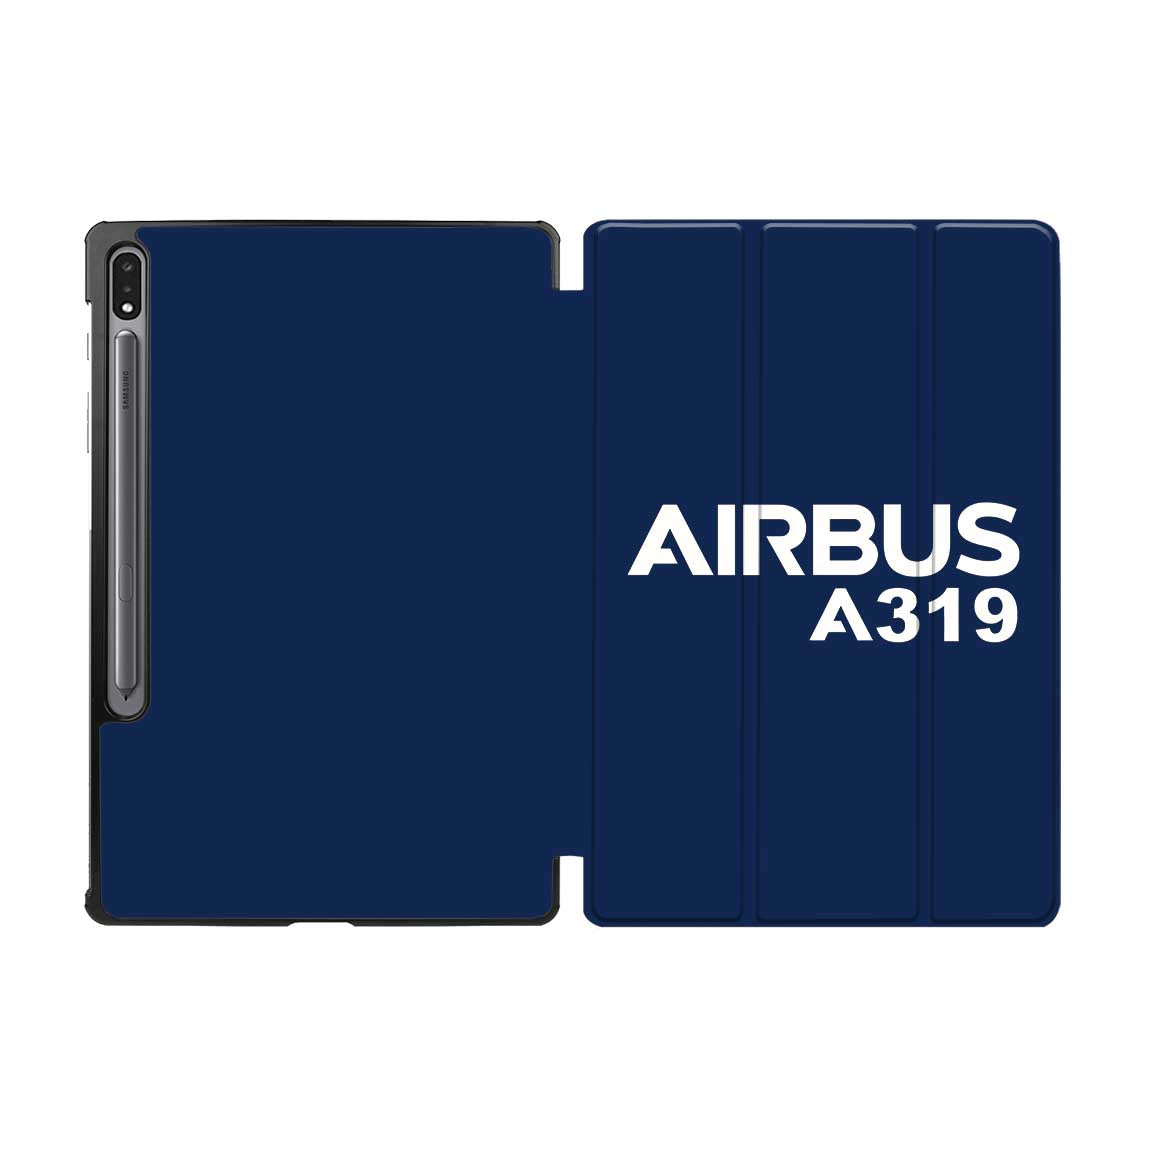 Airbus A319 & Text Designed Samsung Tablet Cases